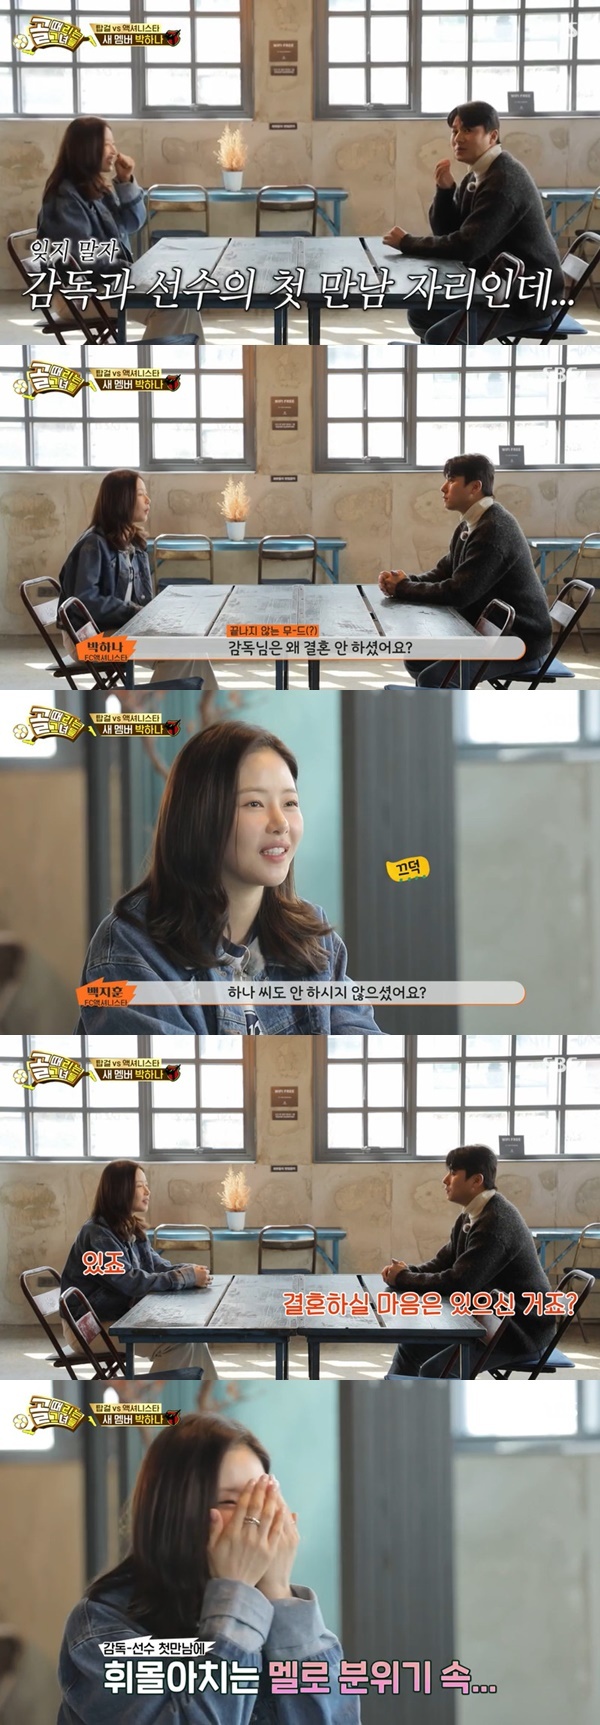 New member Park Ha-na and Baek Ji-hoon Director made a blind date Mood.On May 10, SBS  ⁇  Kick a goal  ⁇ , actor Park Ha-na joined FC Axis Star as a new member.Actinista Director Baek Ji-hoon and new member Park Ha-na met for the first time. Park Ha-na asked me, Do not you know? Baek Ji-hoon replied, I recently watched a drama.When Park Ha-na asked for the title of the drama, Baek Ji-hoon said, I dont know the title, but its 7:30 p.m. He looked at it by chance and said, Shes pretty.Park Ha-na said, Mood is too awkward. Is this right? Is this Mood right? Im too nervous. Im so nervous now. Director, why did not you get married?Baek Ji-hoon said, I think I just missed the timing of my wedding. I asked if you were willing to get married. Park Ha-na replied, I am. The production team added a smile with the subtitle Melo Mood.